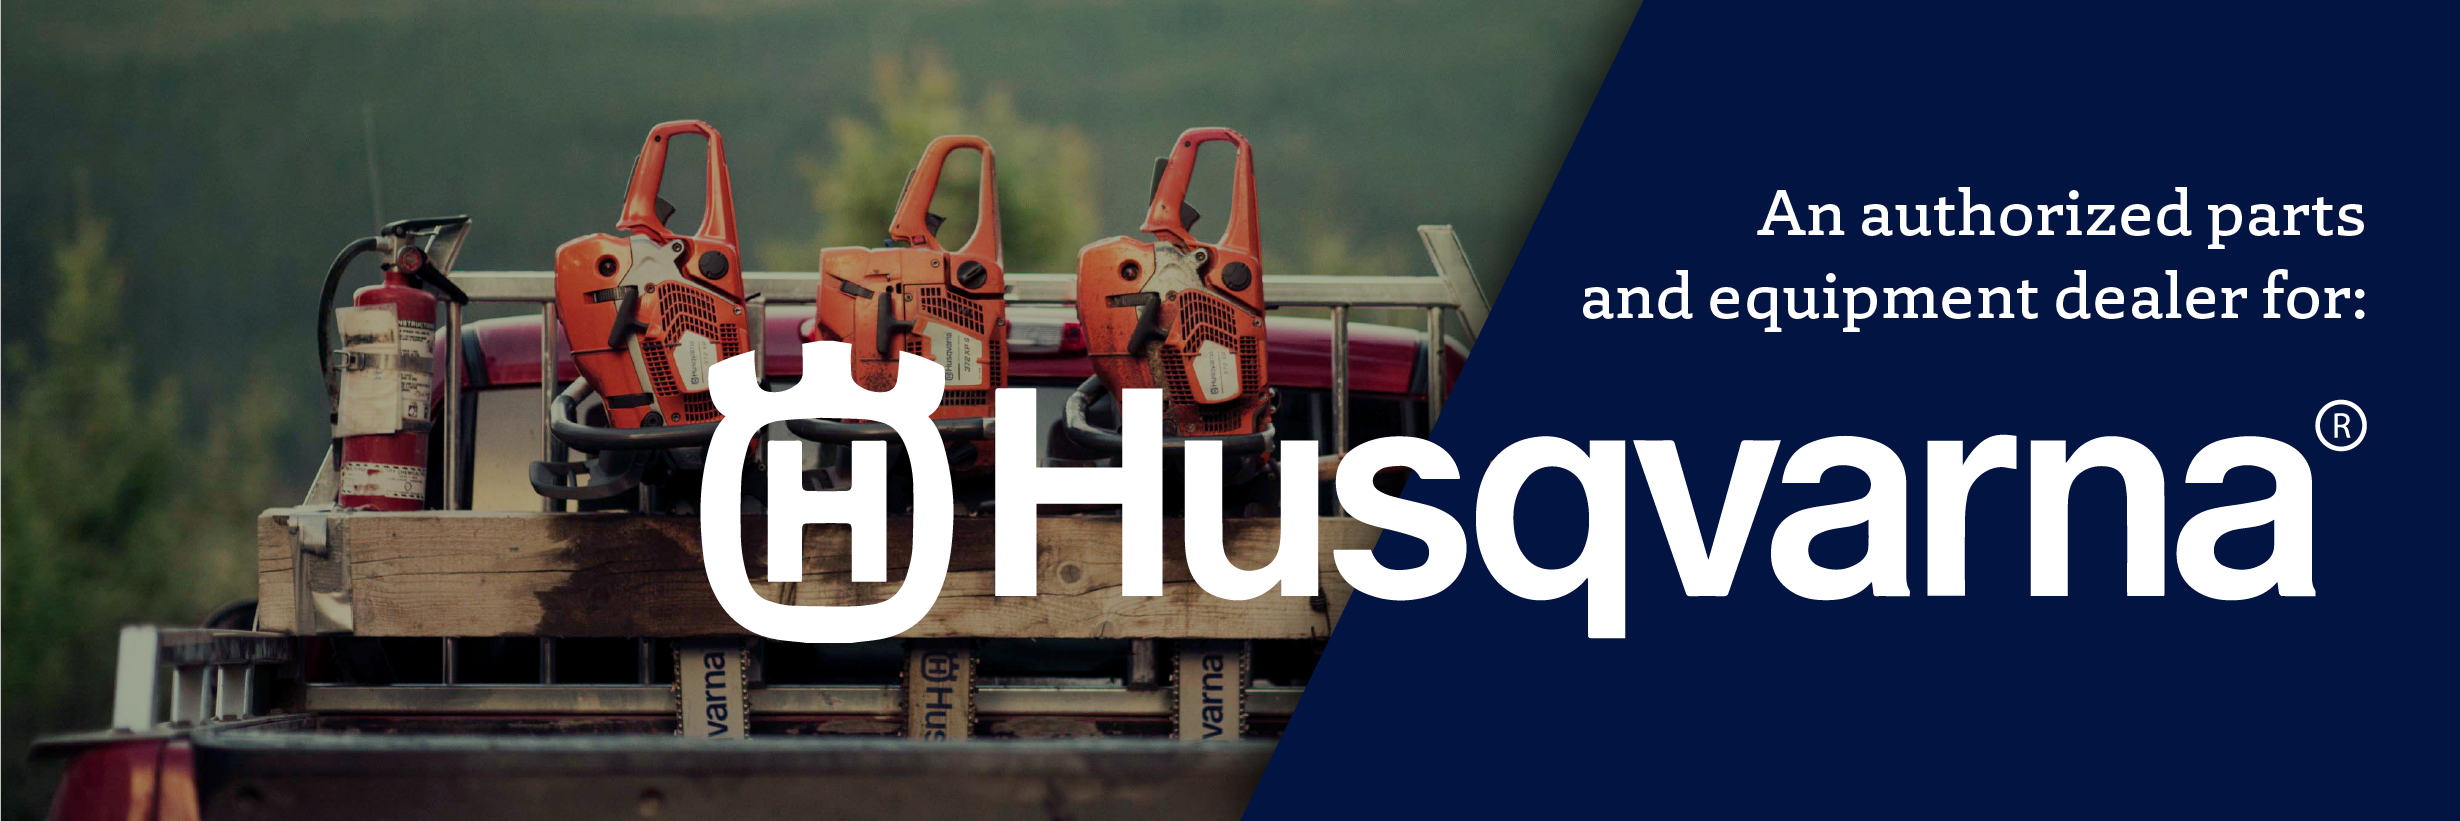 Husqvarna Equipment. Clicking this will link you to the husqvarna website